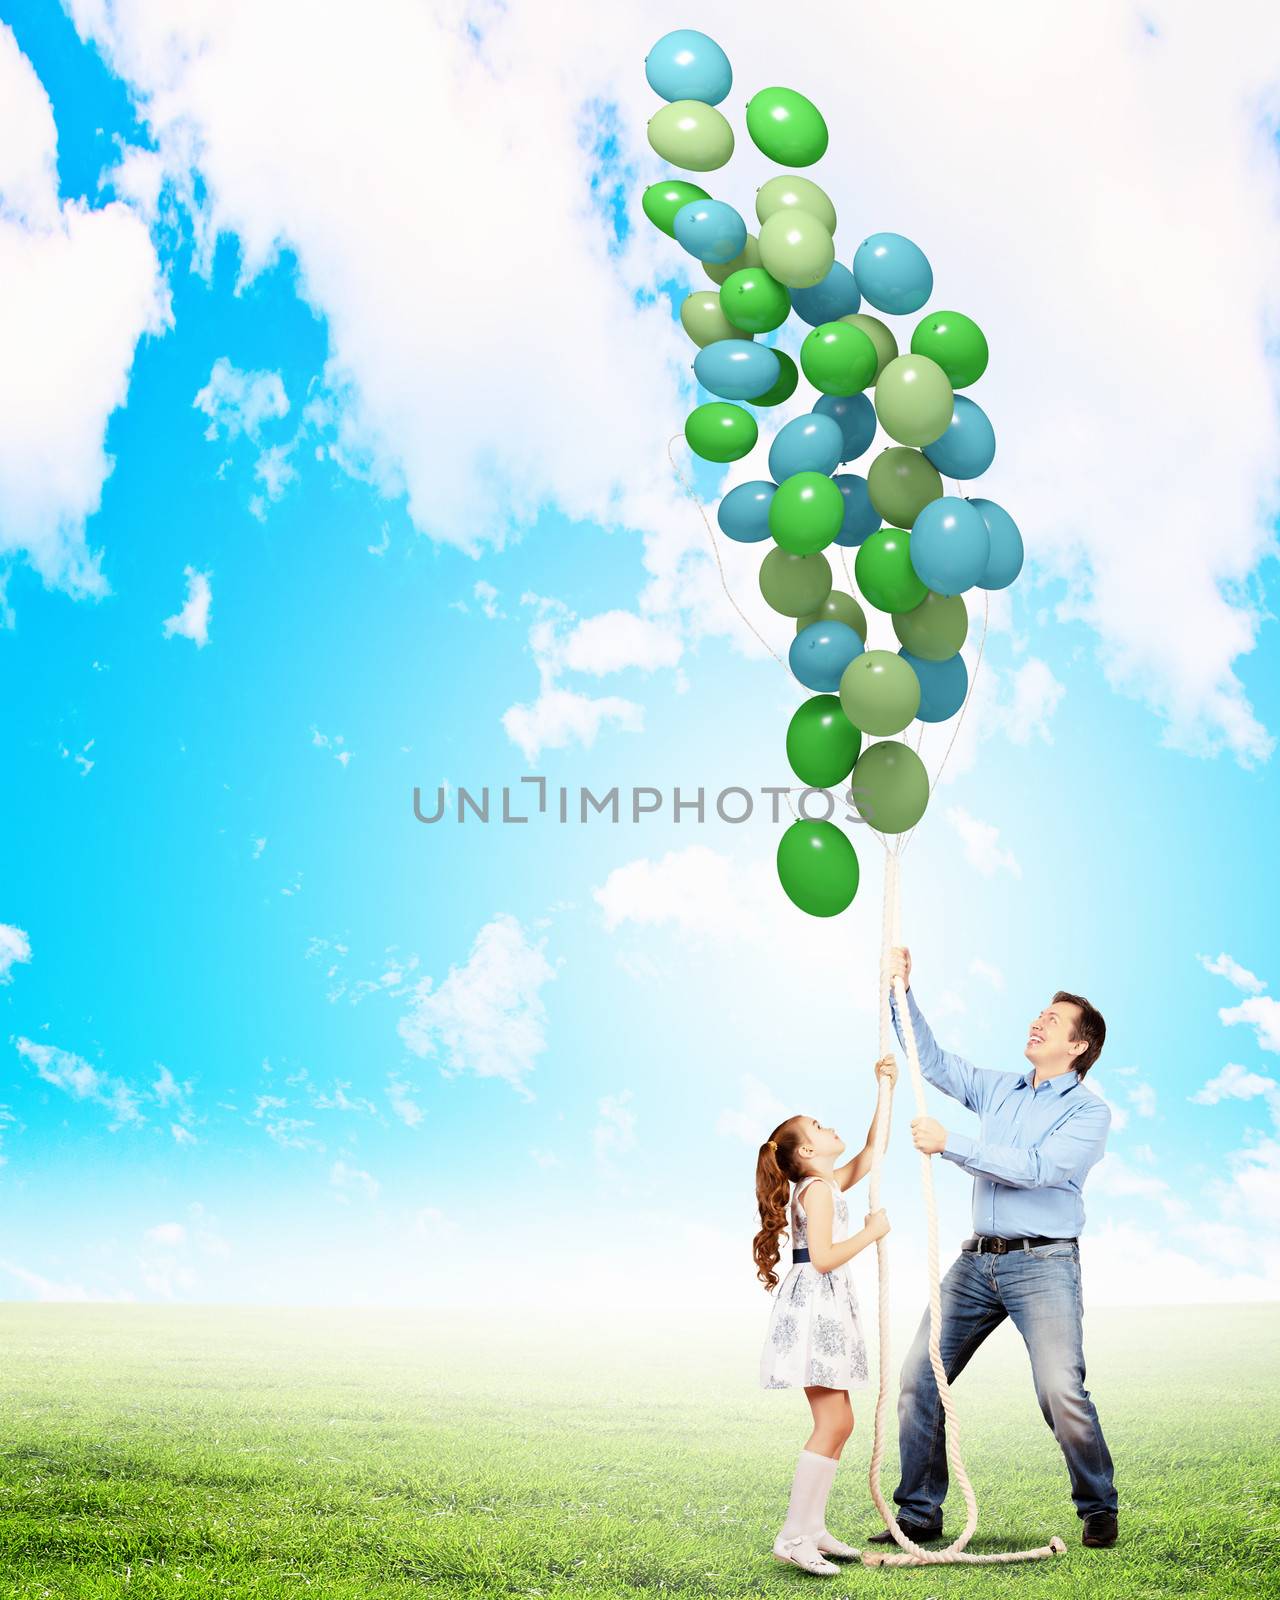 Image of father and daughter playing with bunch of colorful balloons